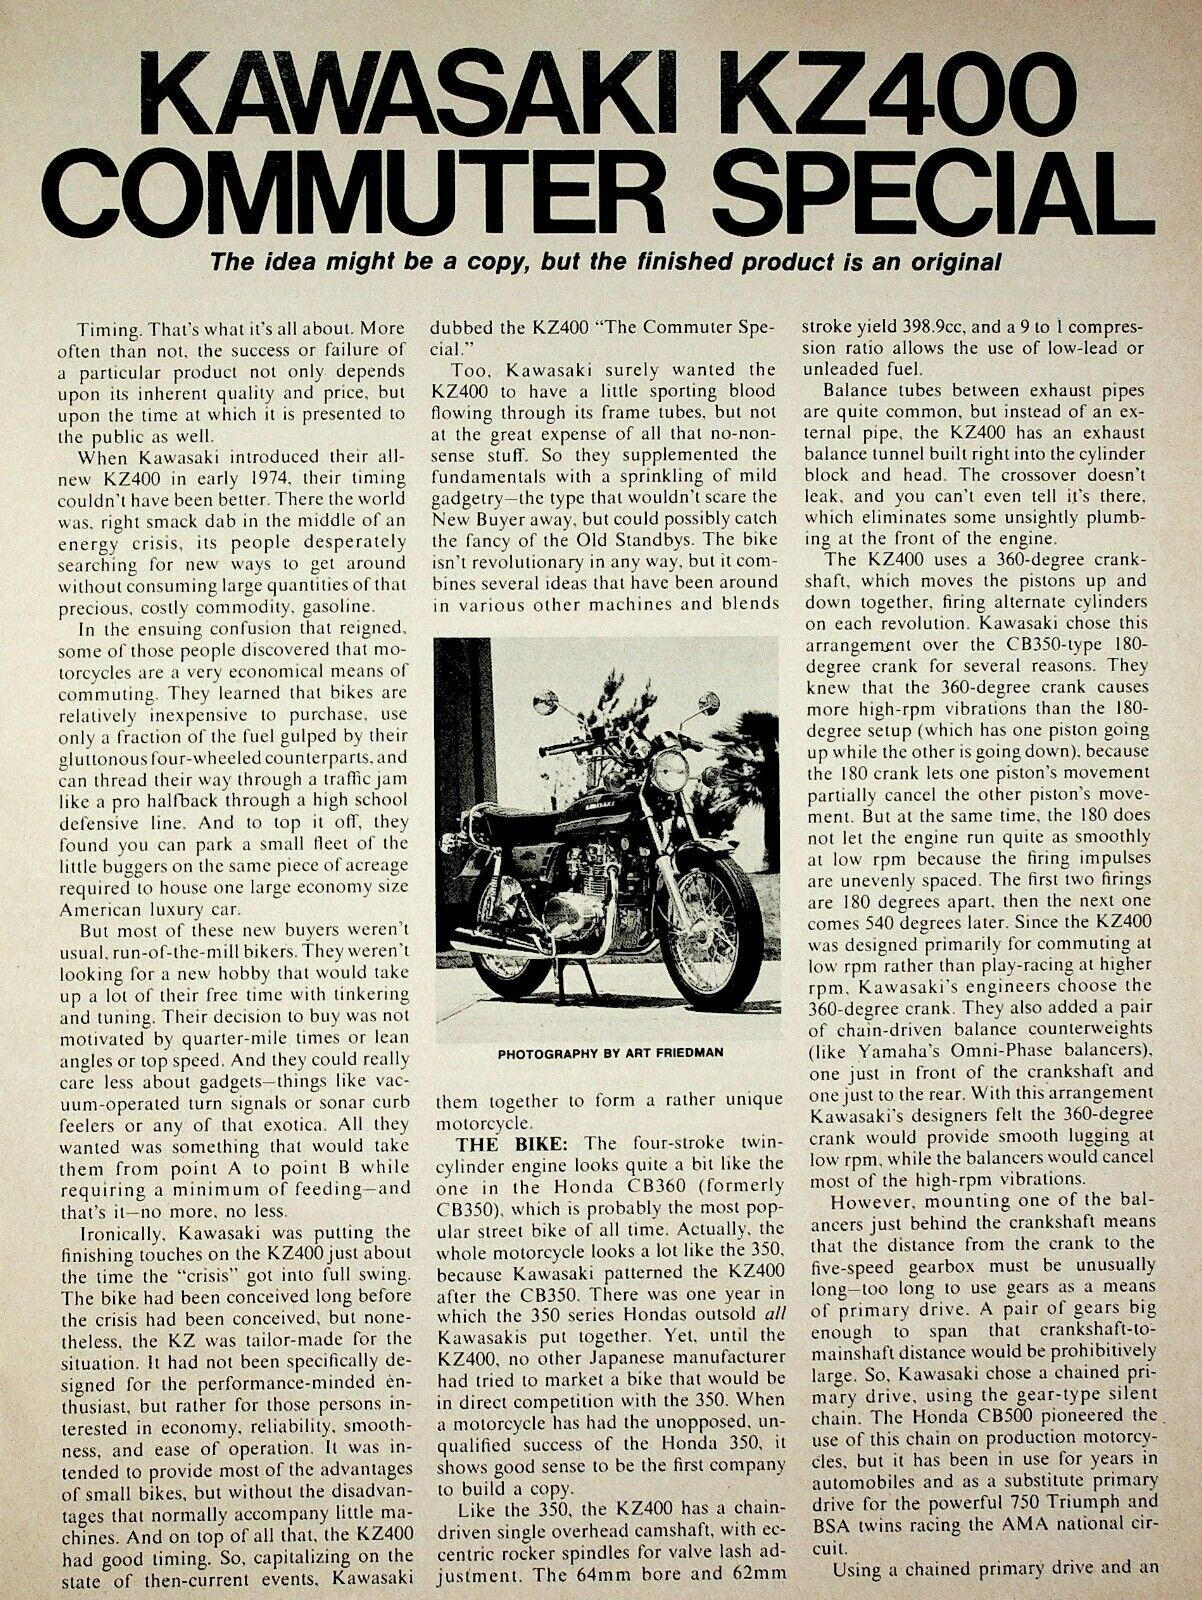 1974 Kawasaki KZ400 Commuter Special - 6-Page Vintage Motorcycle Article